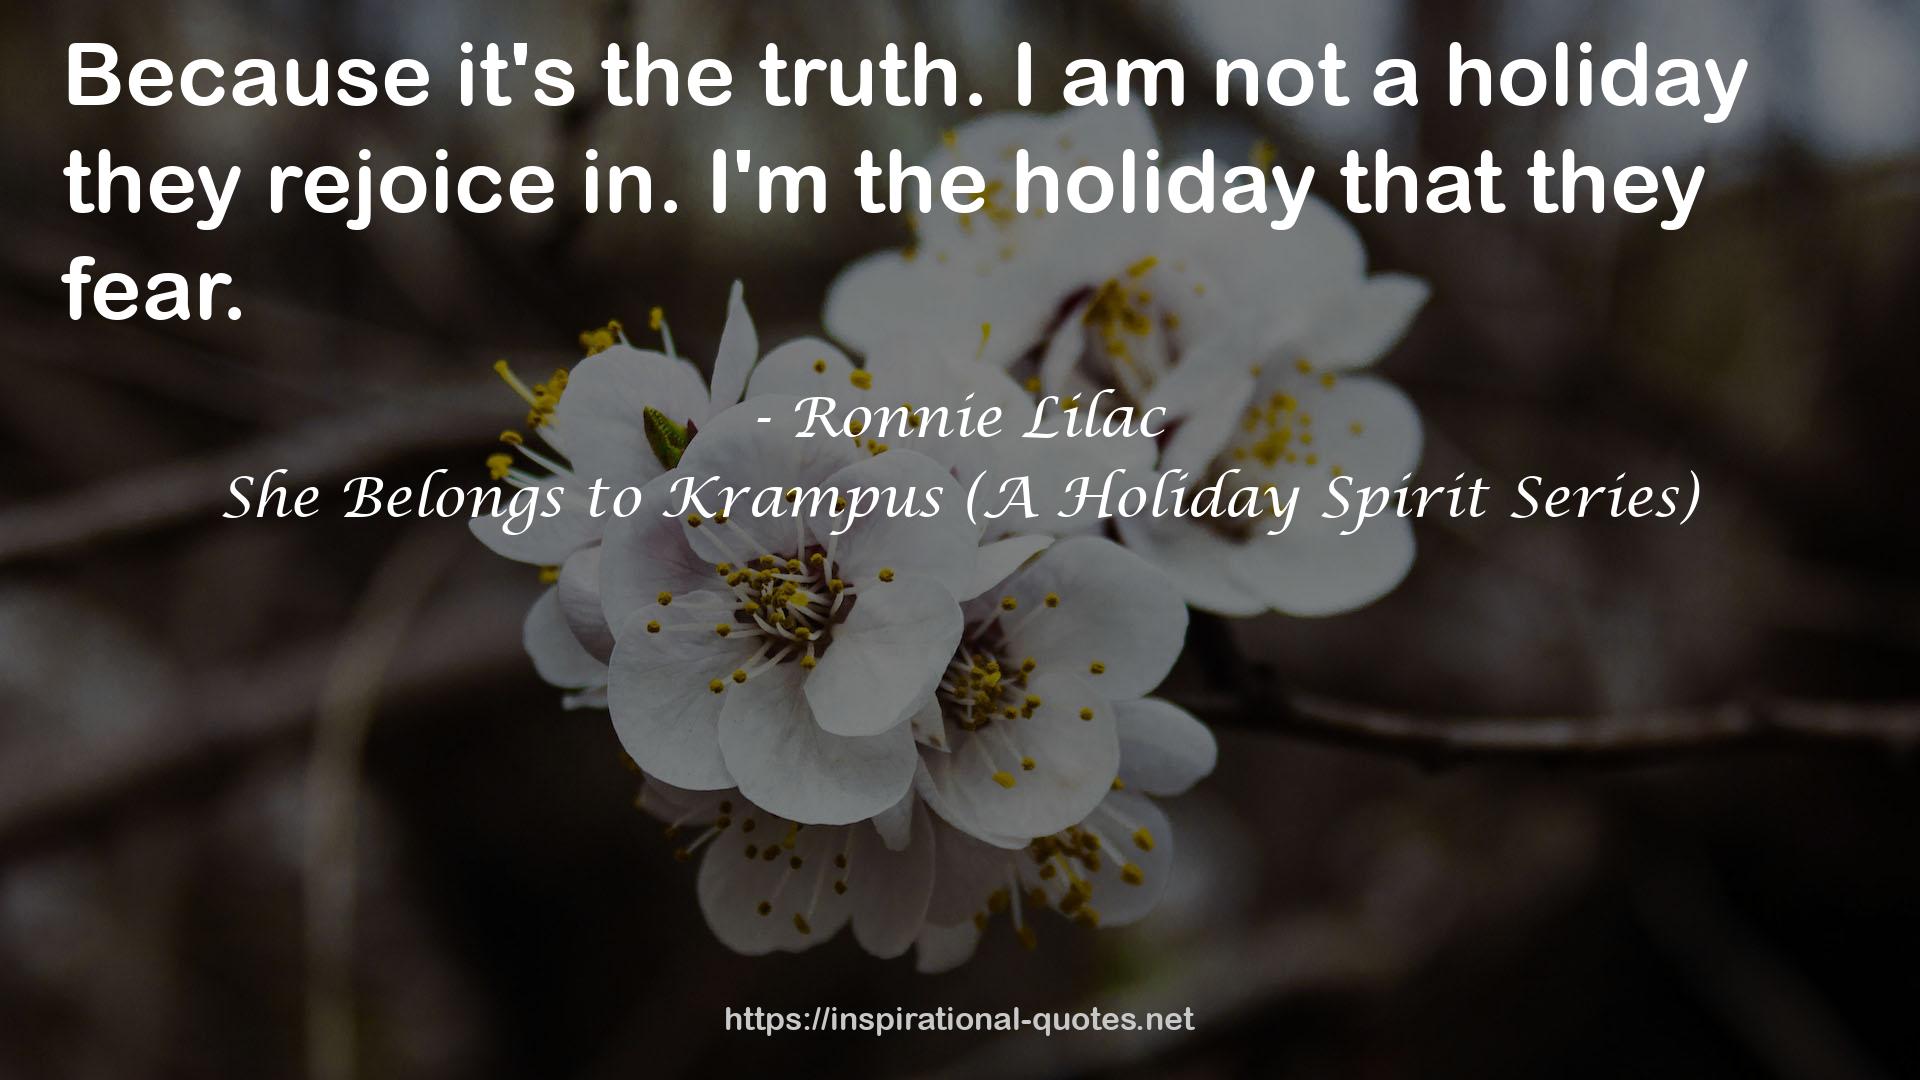 She Belongs to Krampus (A Holiday Spirit Series) QUOTES